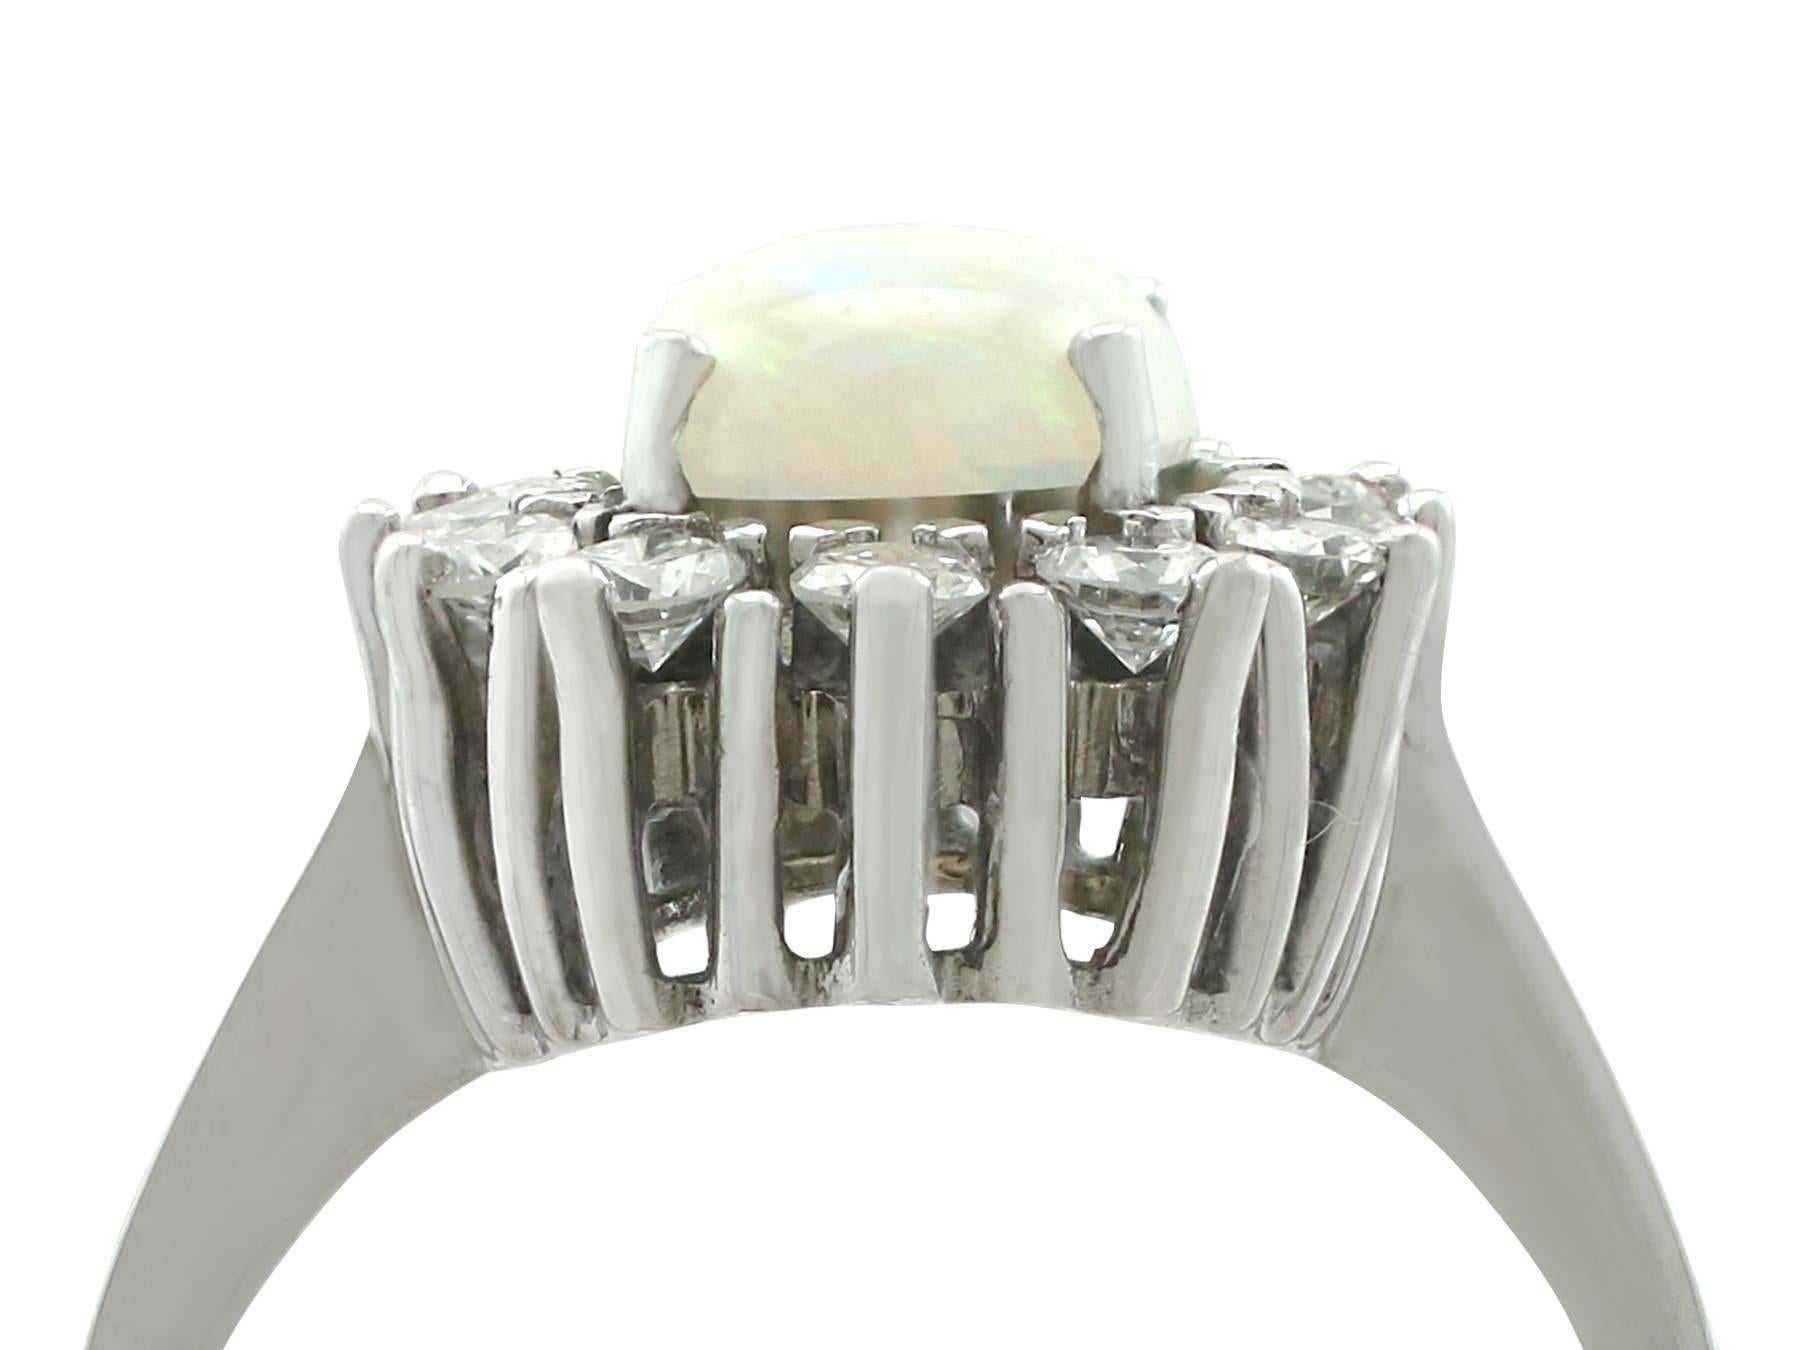 An impressive vintage 1.26 carat opal and 0.60 carat diamond, 14k white gold cluster ring; part of our diverse gemstone jewellery collections. 

This fine and impressive vintage opal cluster ring has been crafted in 14k white gold.

The pierced